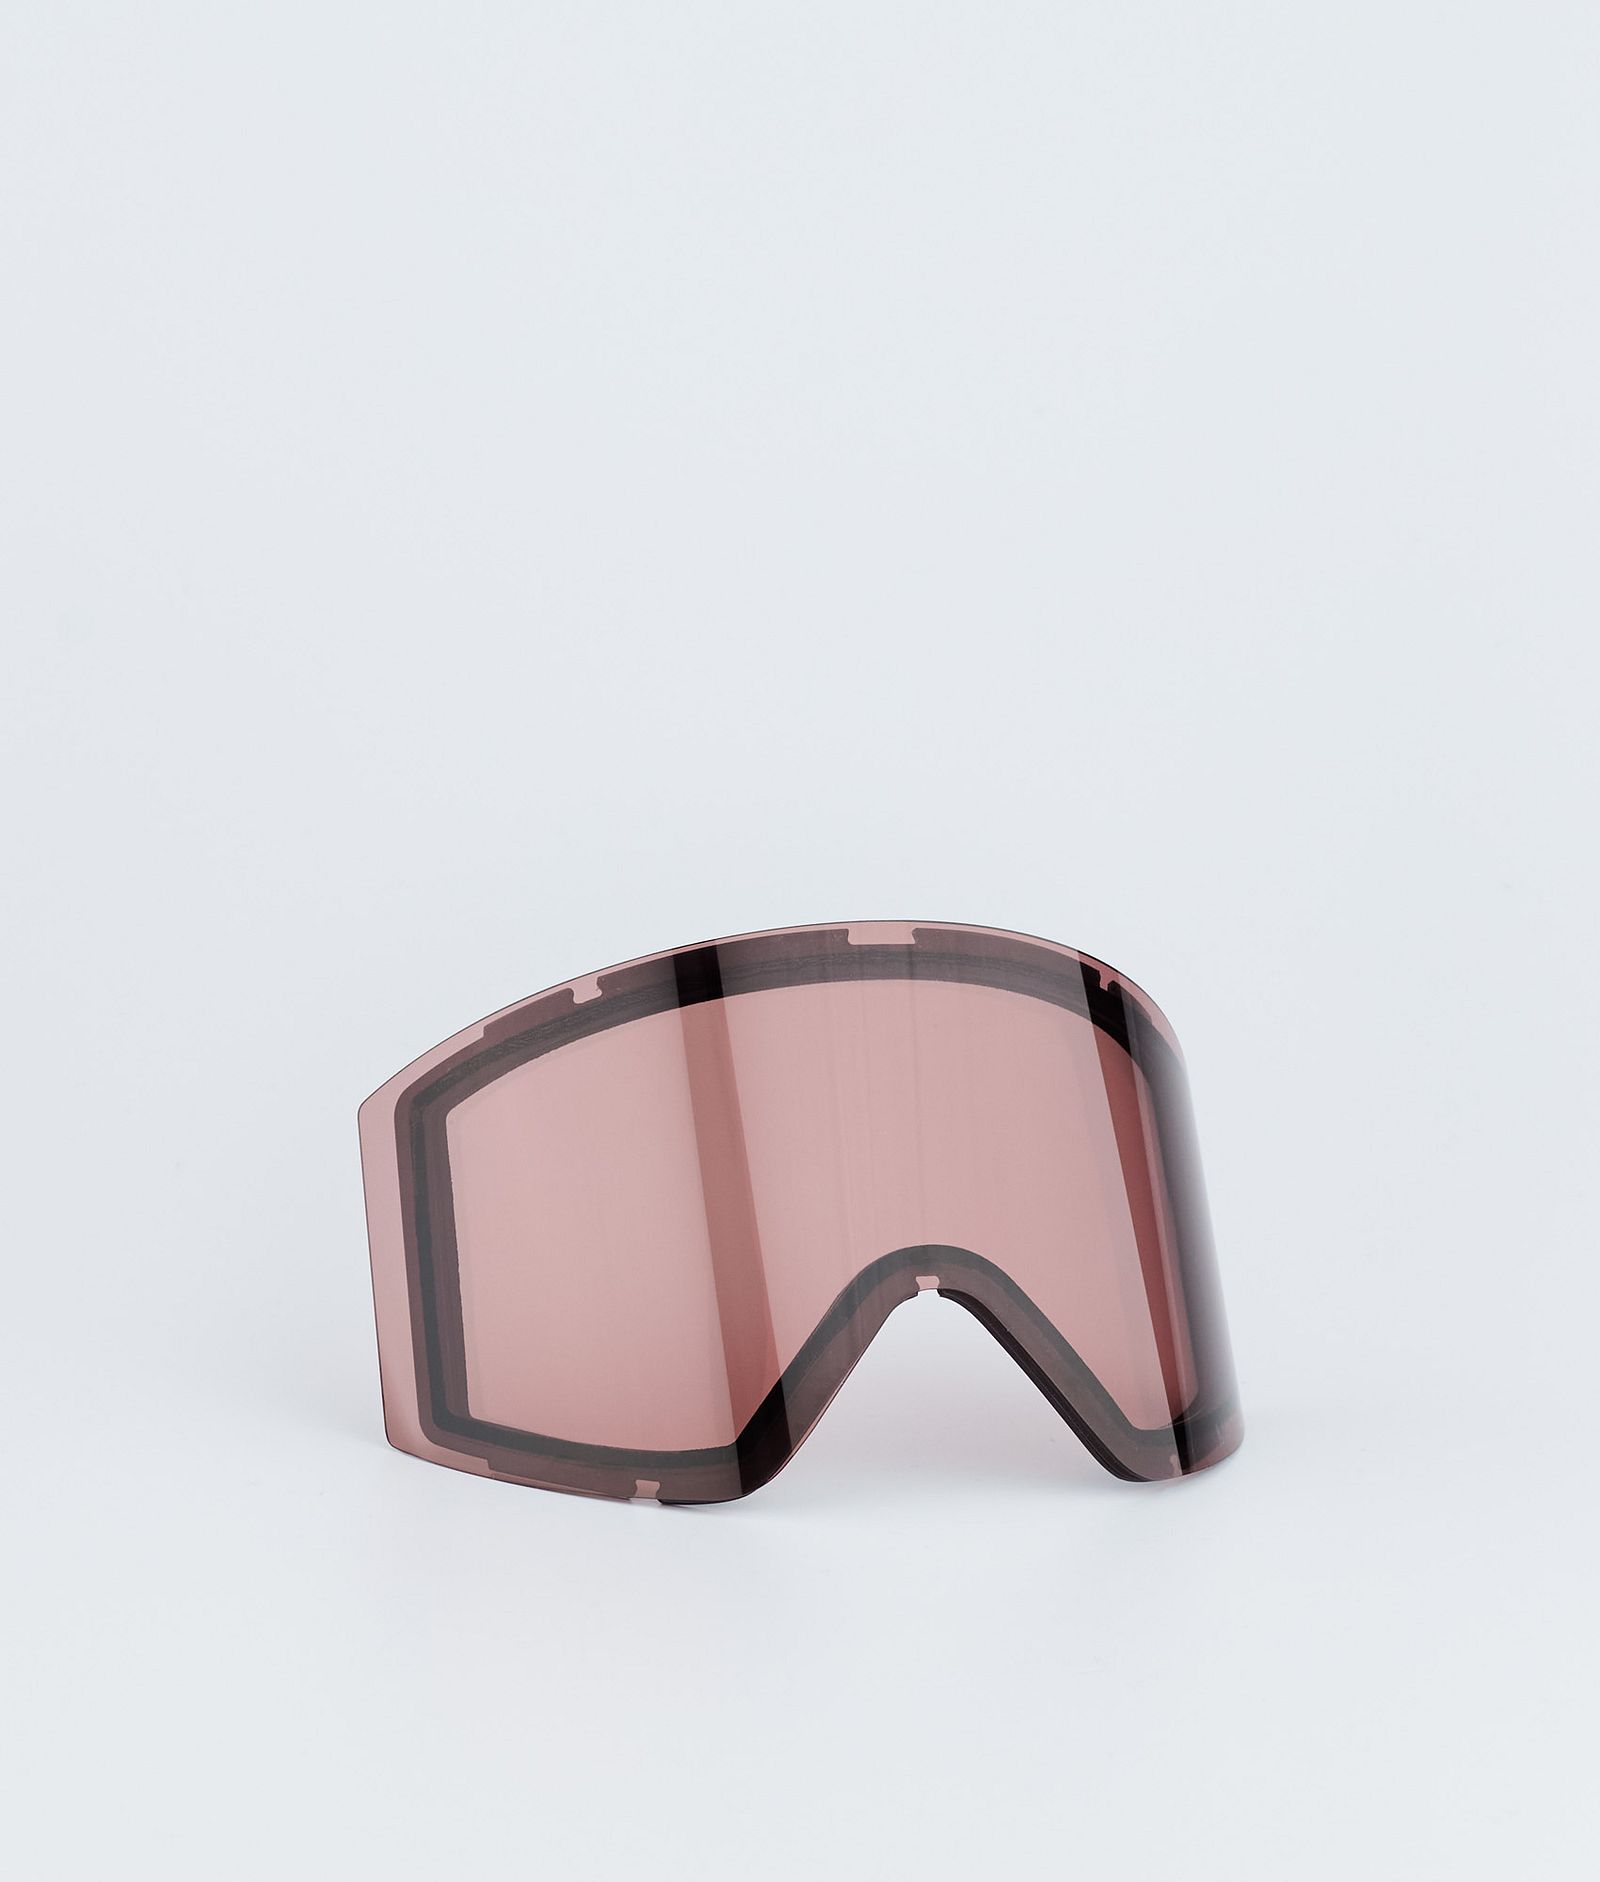 Scope Goggle Lens Extralins Snow Persimmon